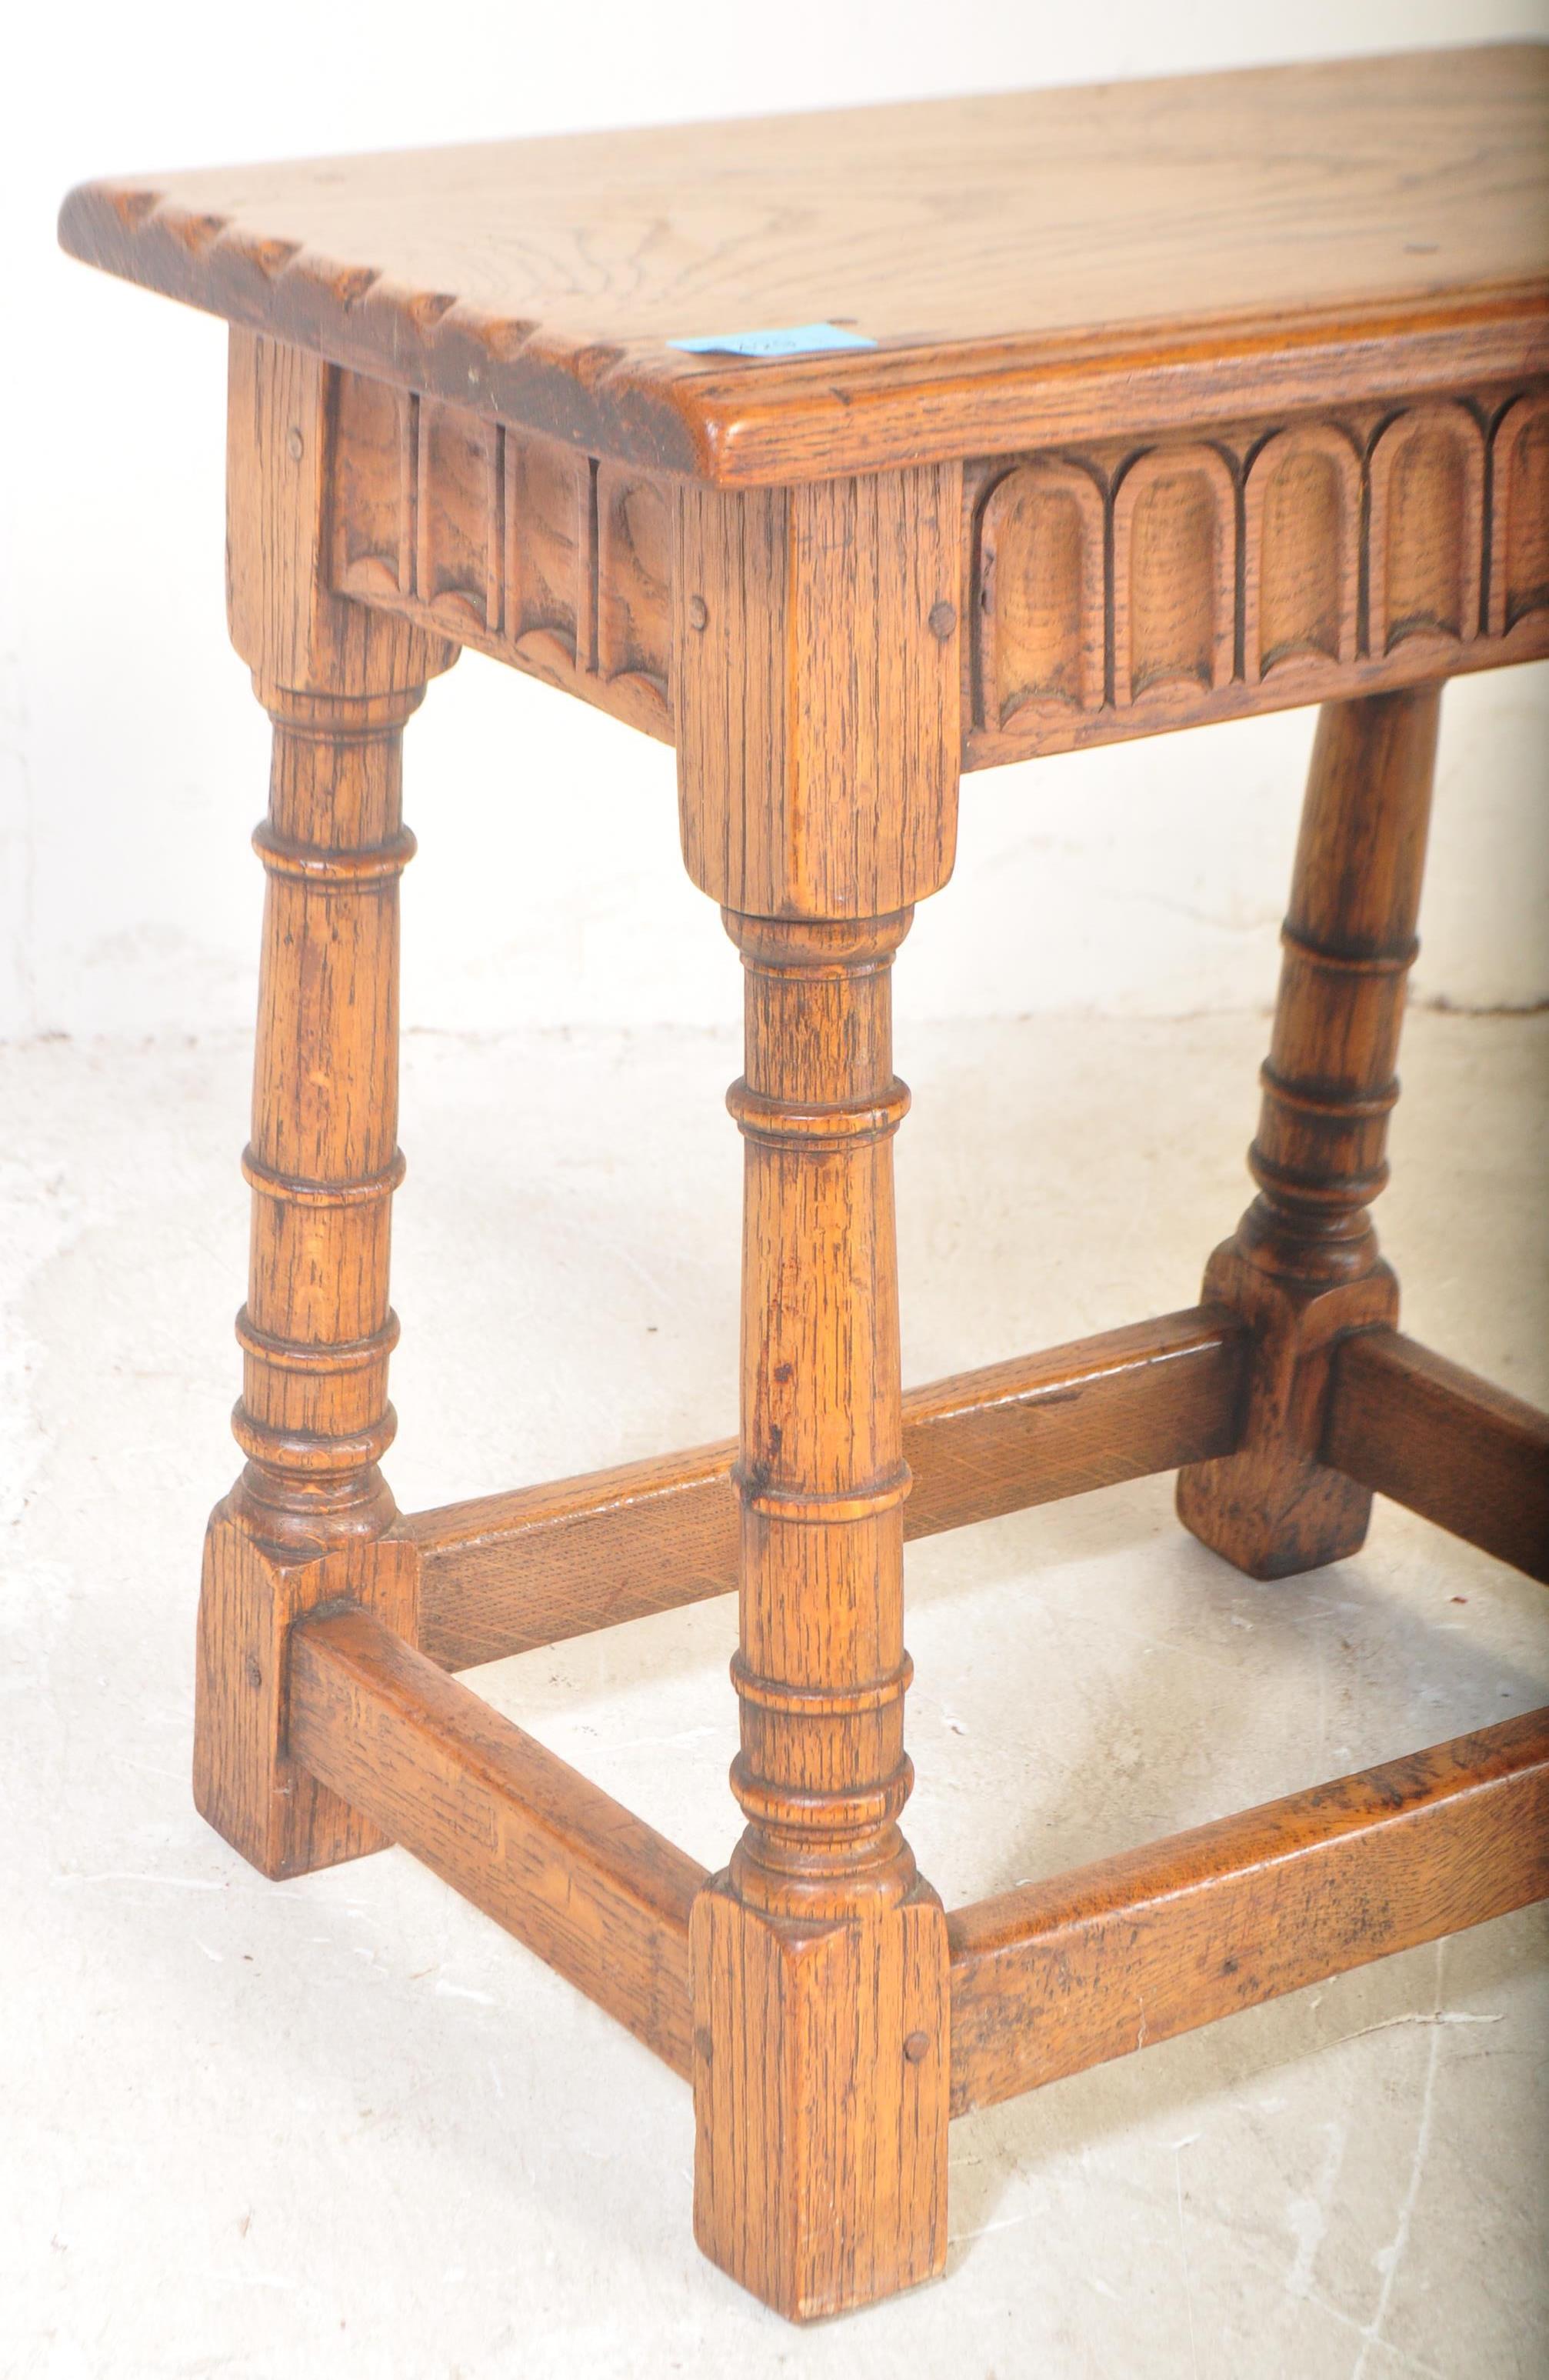 19TH CENTURY PEG JOINTED ARTS & CRAFTS OAK JOINT STOOL - Image 4 of 4